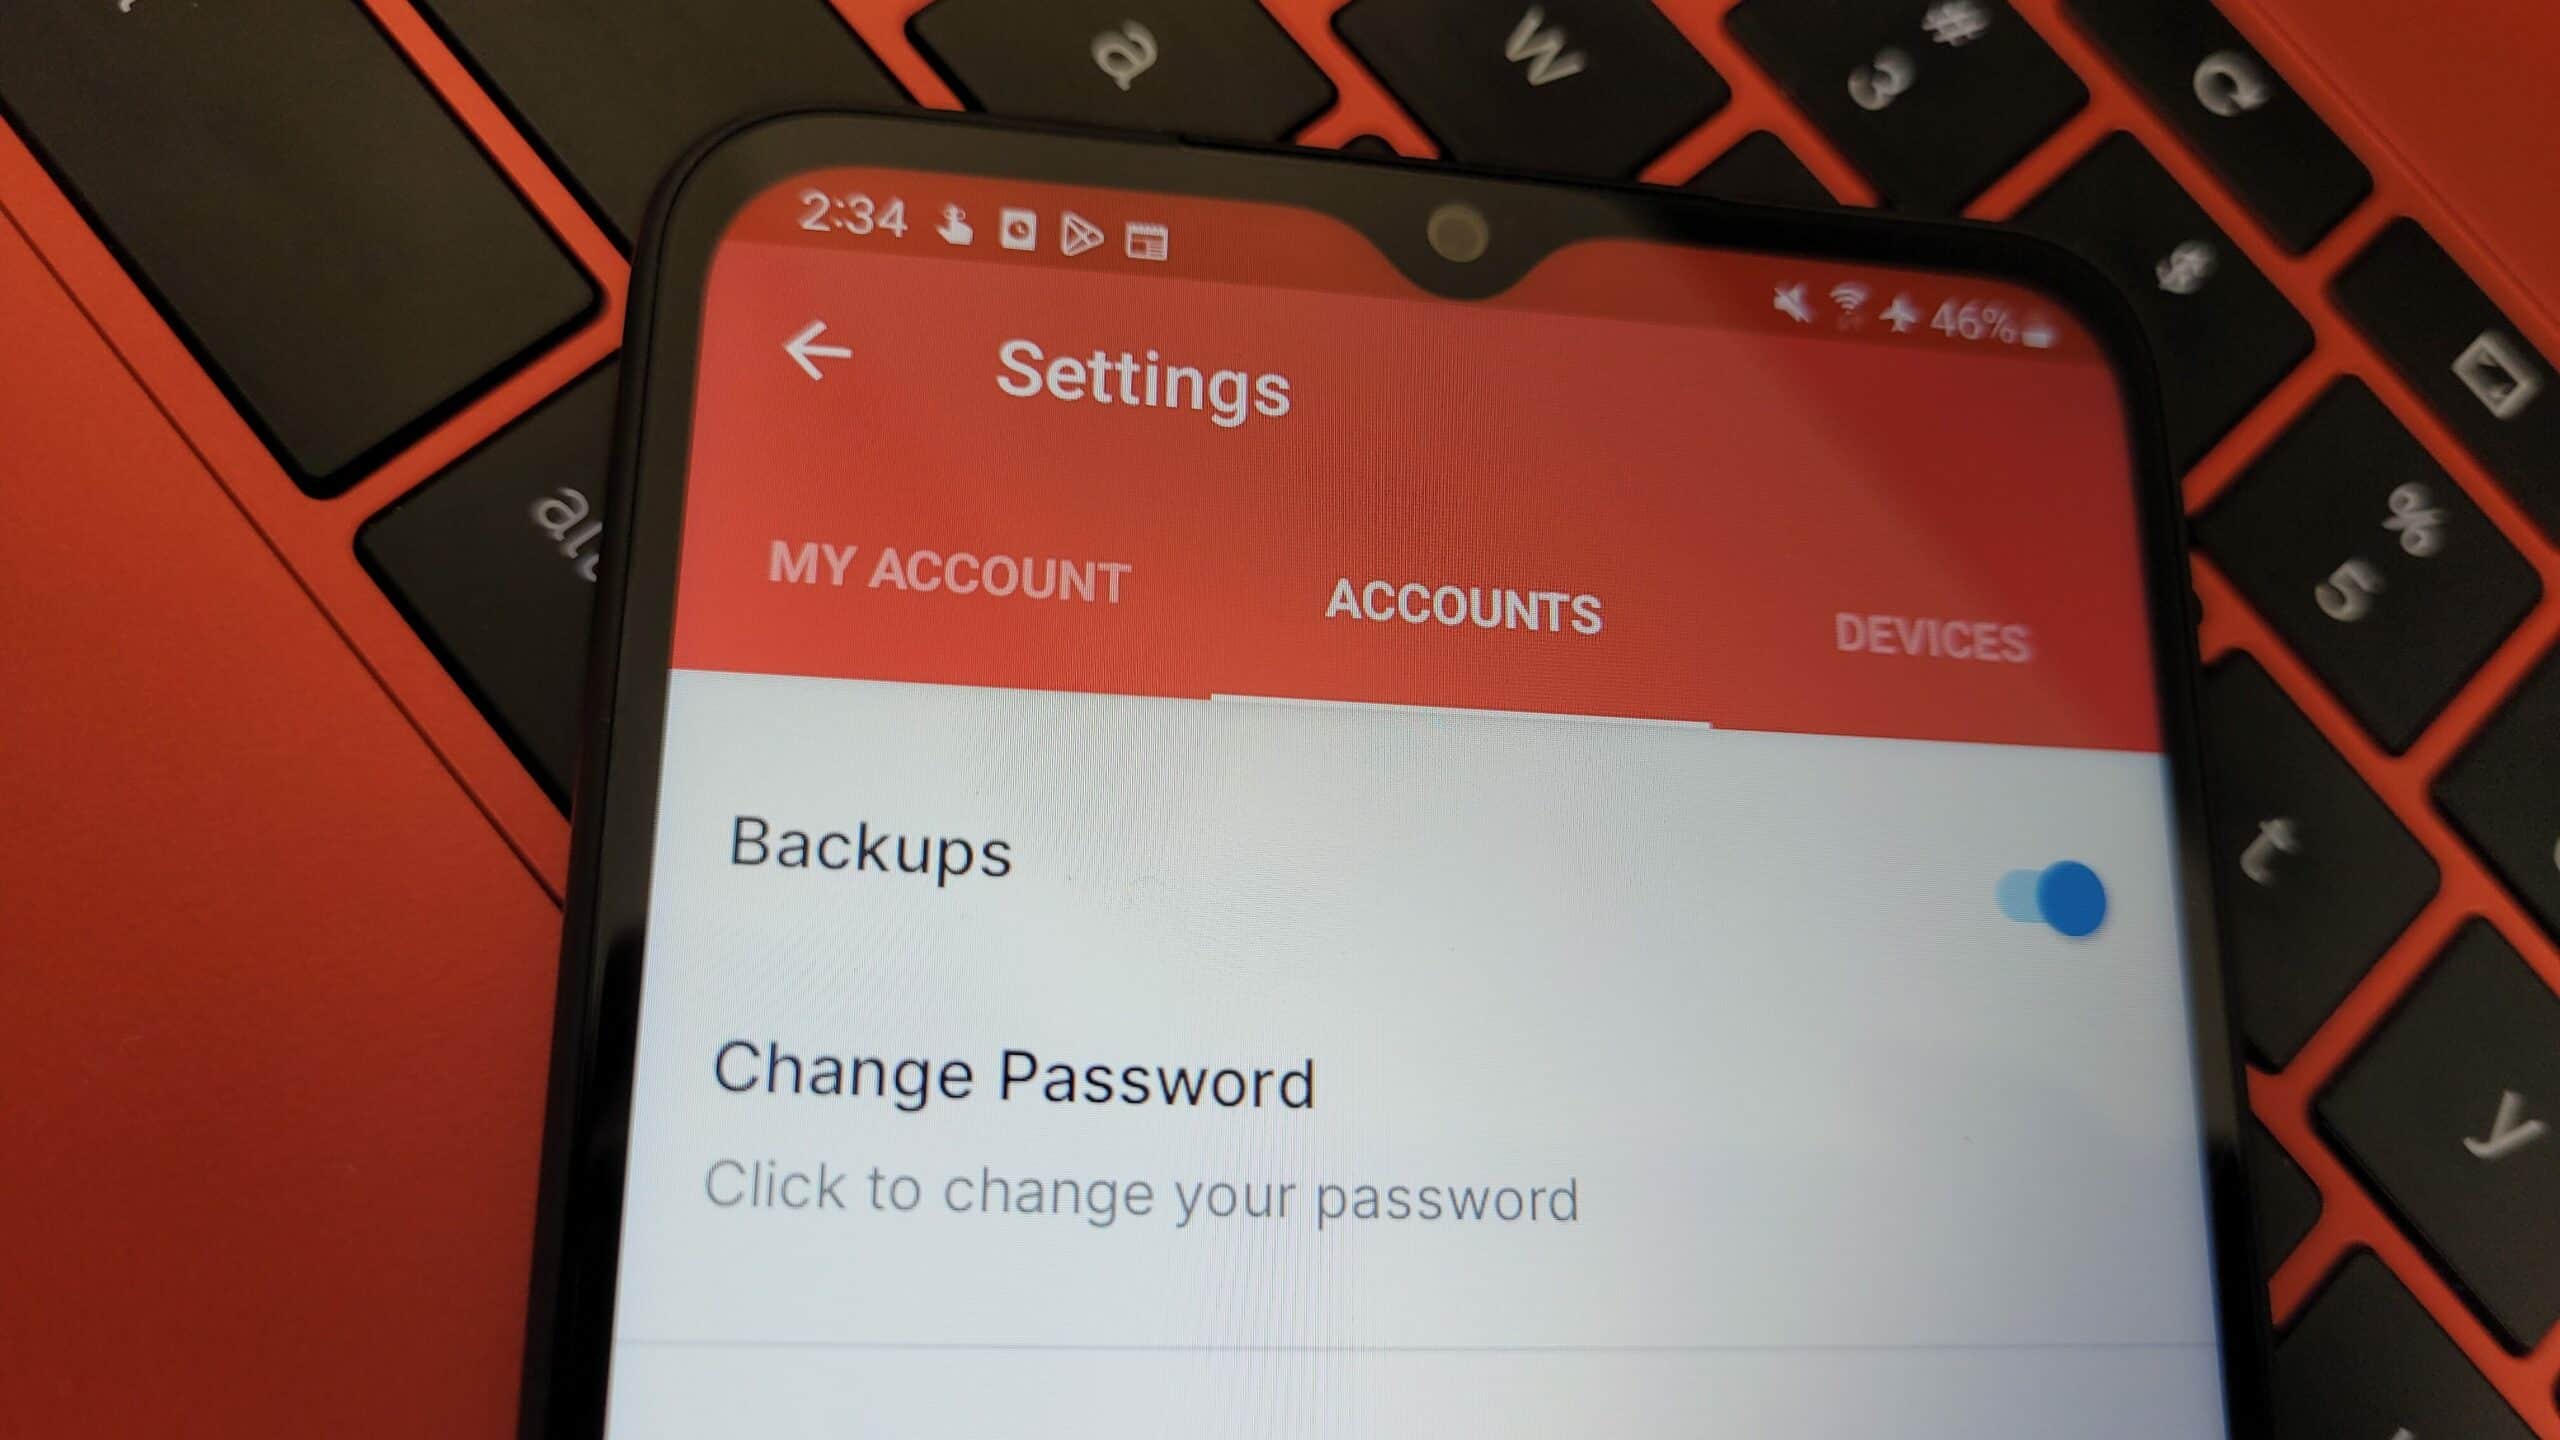 The "Accounts" tab of the Authy app. Backups are enabled and there is the option to change the password.